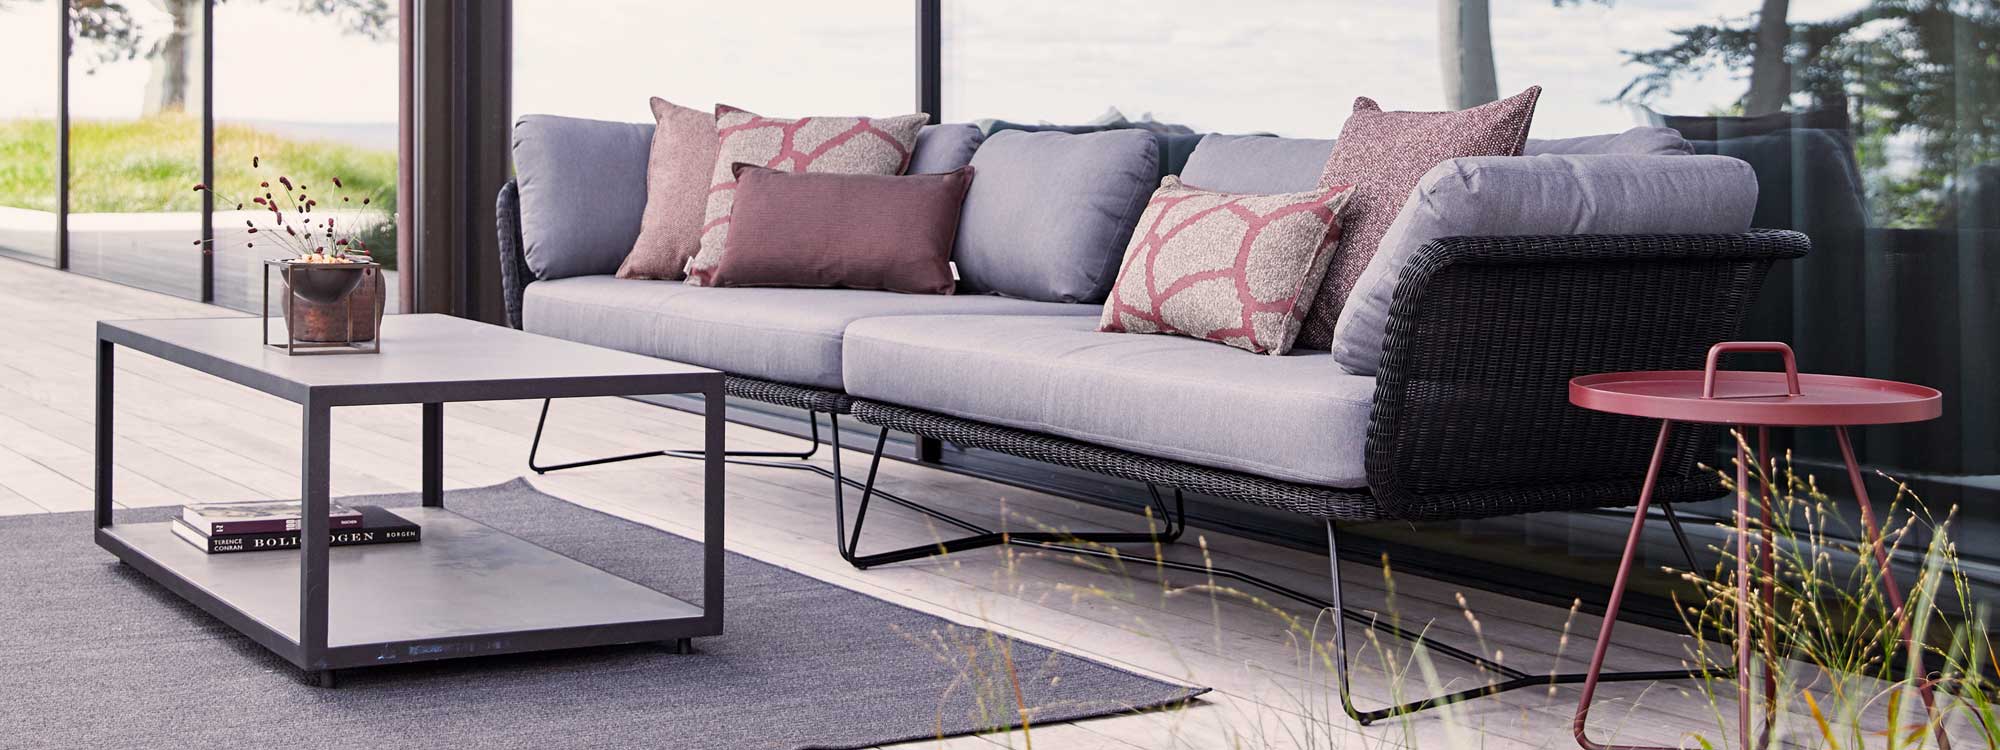 Image of Caneline Horizon black rattan garden sofa with grey cushions, with lava-grey Level table with ceramic surfaces